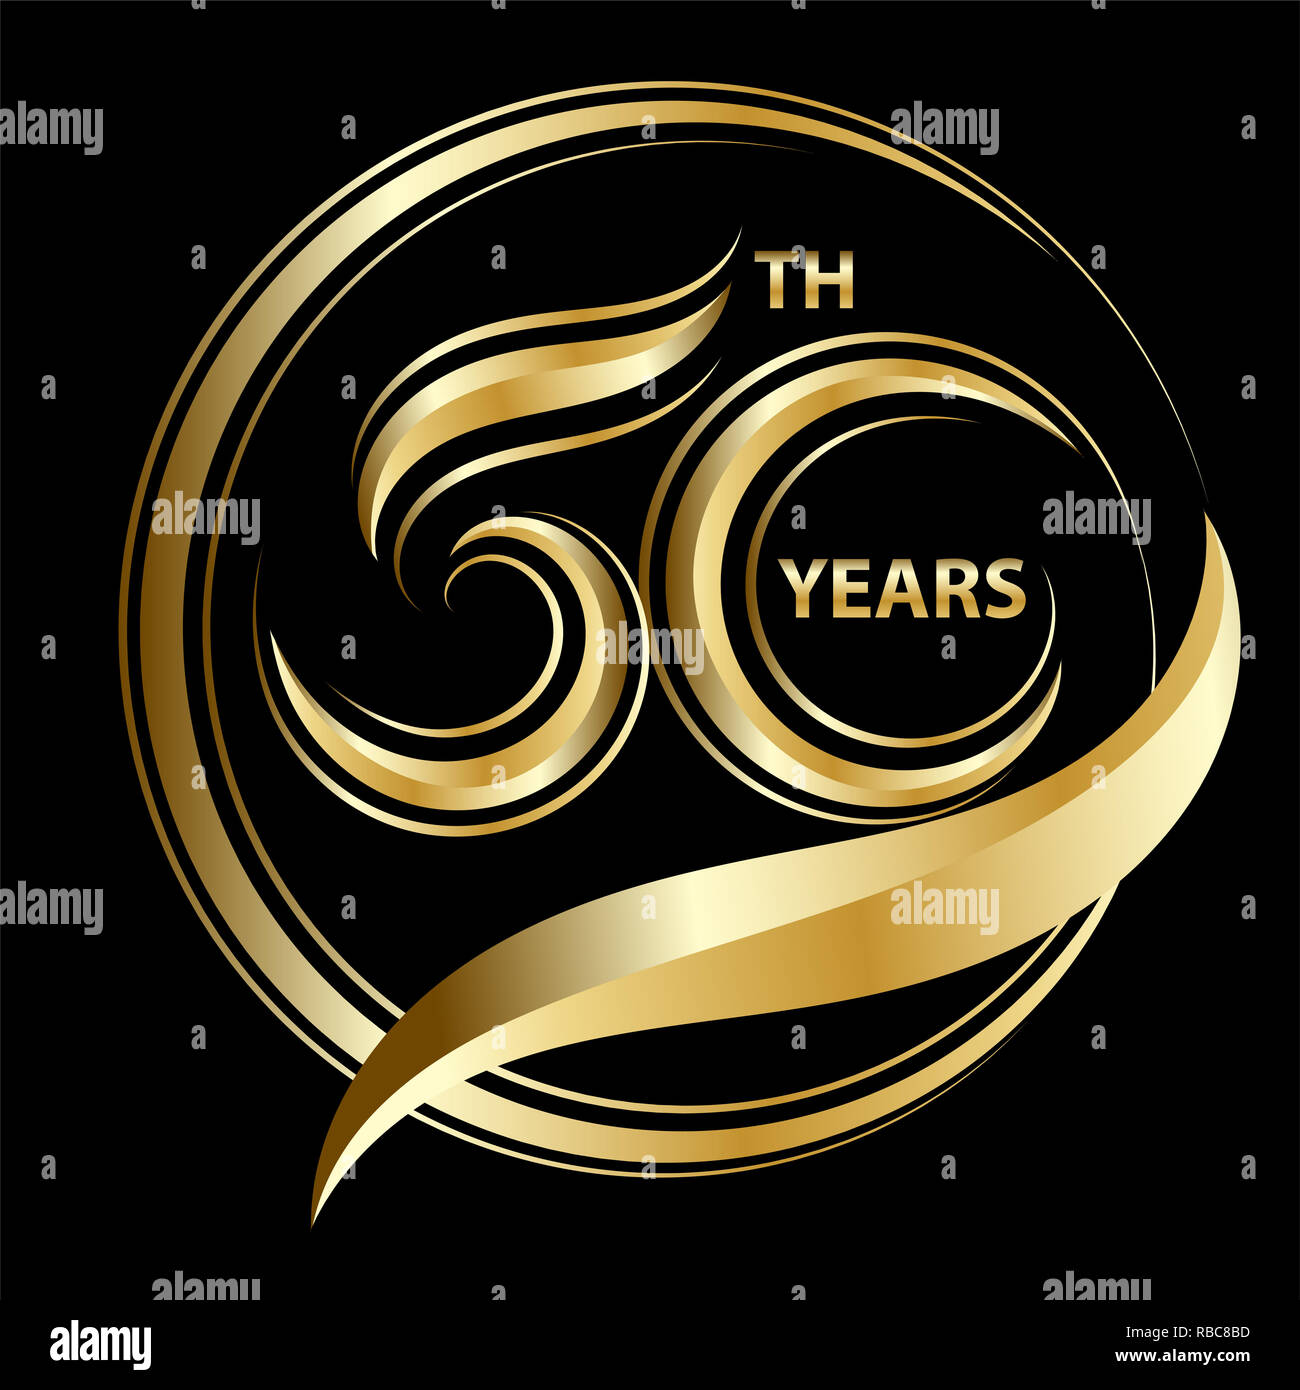 Golden 50th Anniversary Sign And Logo For Gold Celebration Symbol Stock Photo Alamy,How Do You Make Soap Bubbles